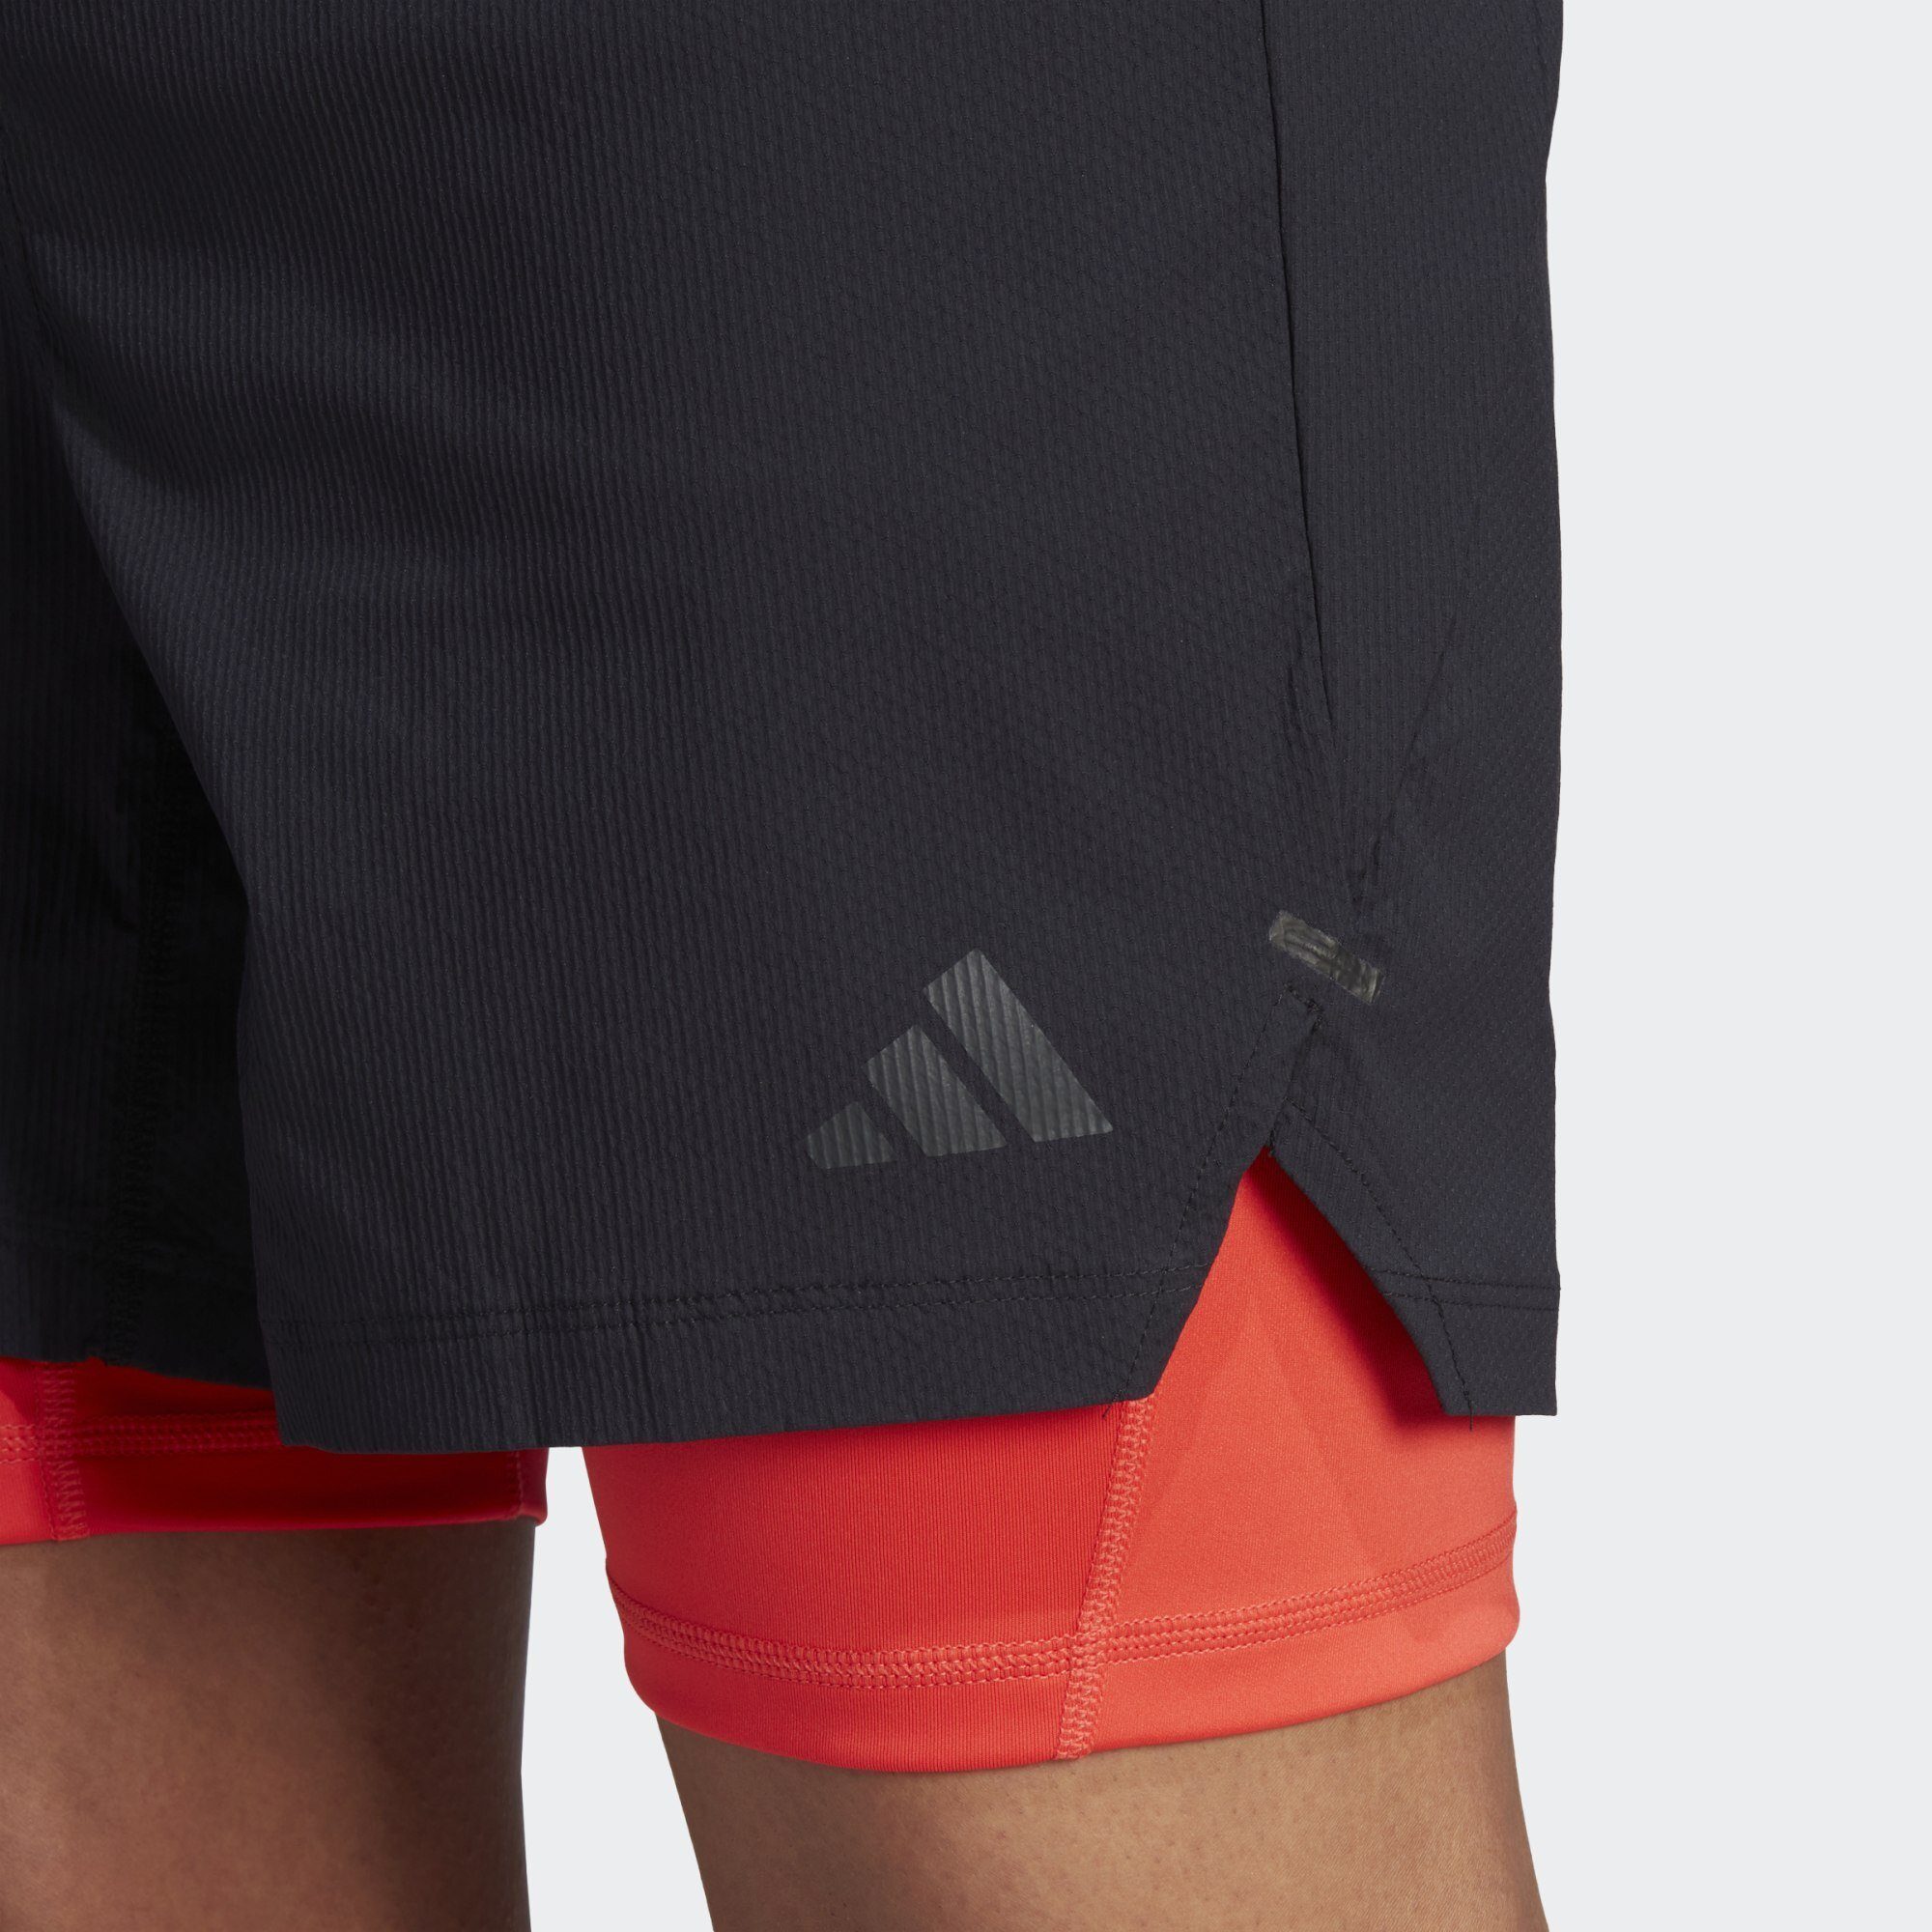 TWO-IN-ONE POWER Performance / Bright Black 2-in-1-Shorts Red adidas SHORTS WORKOUT Black /